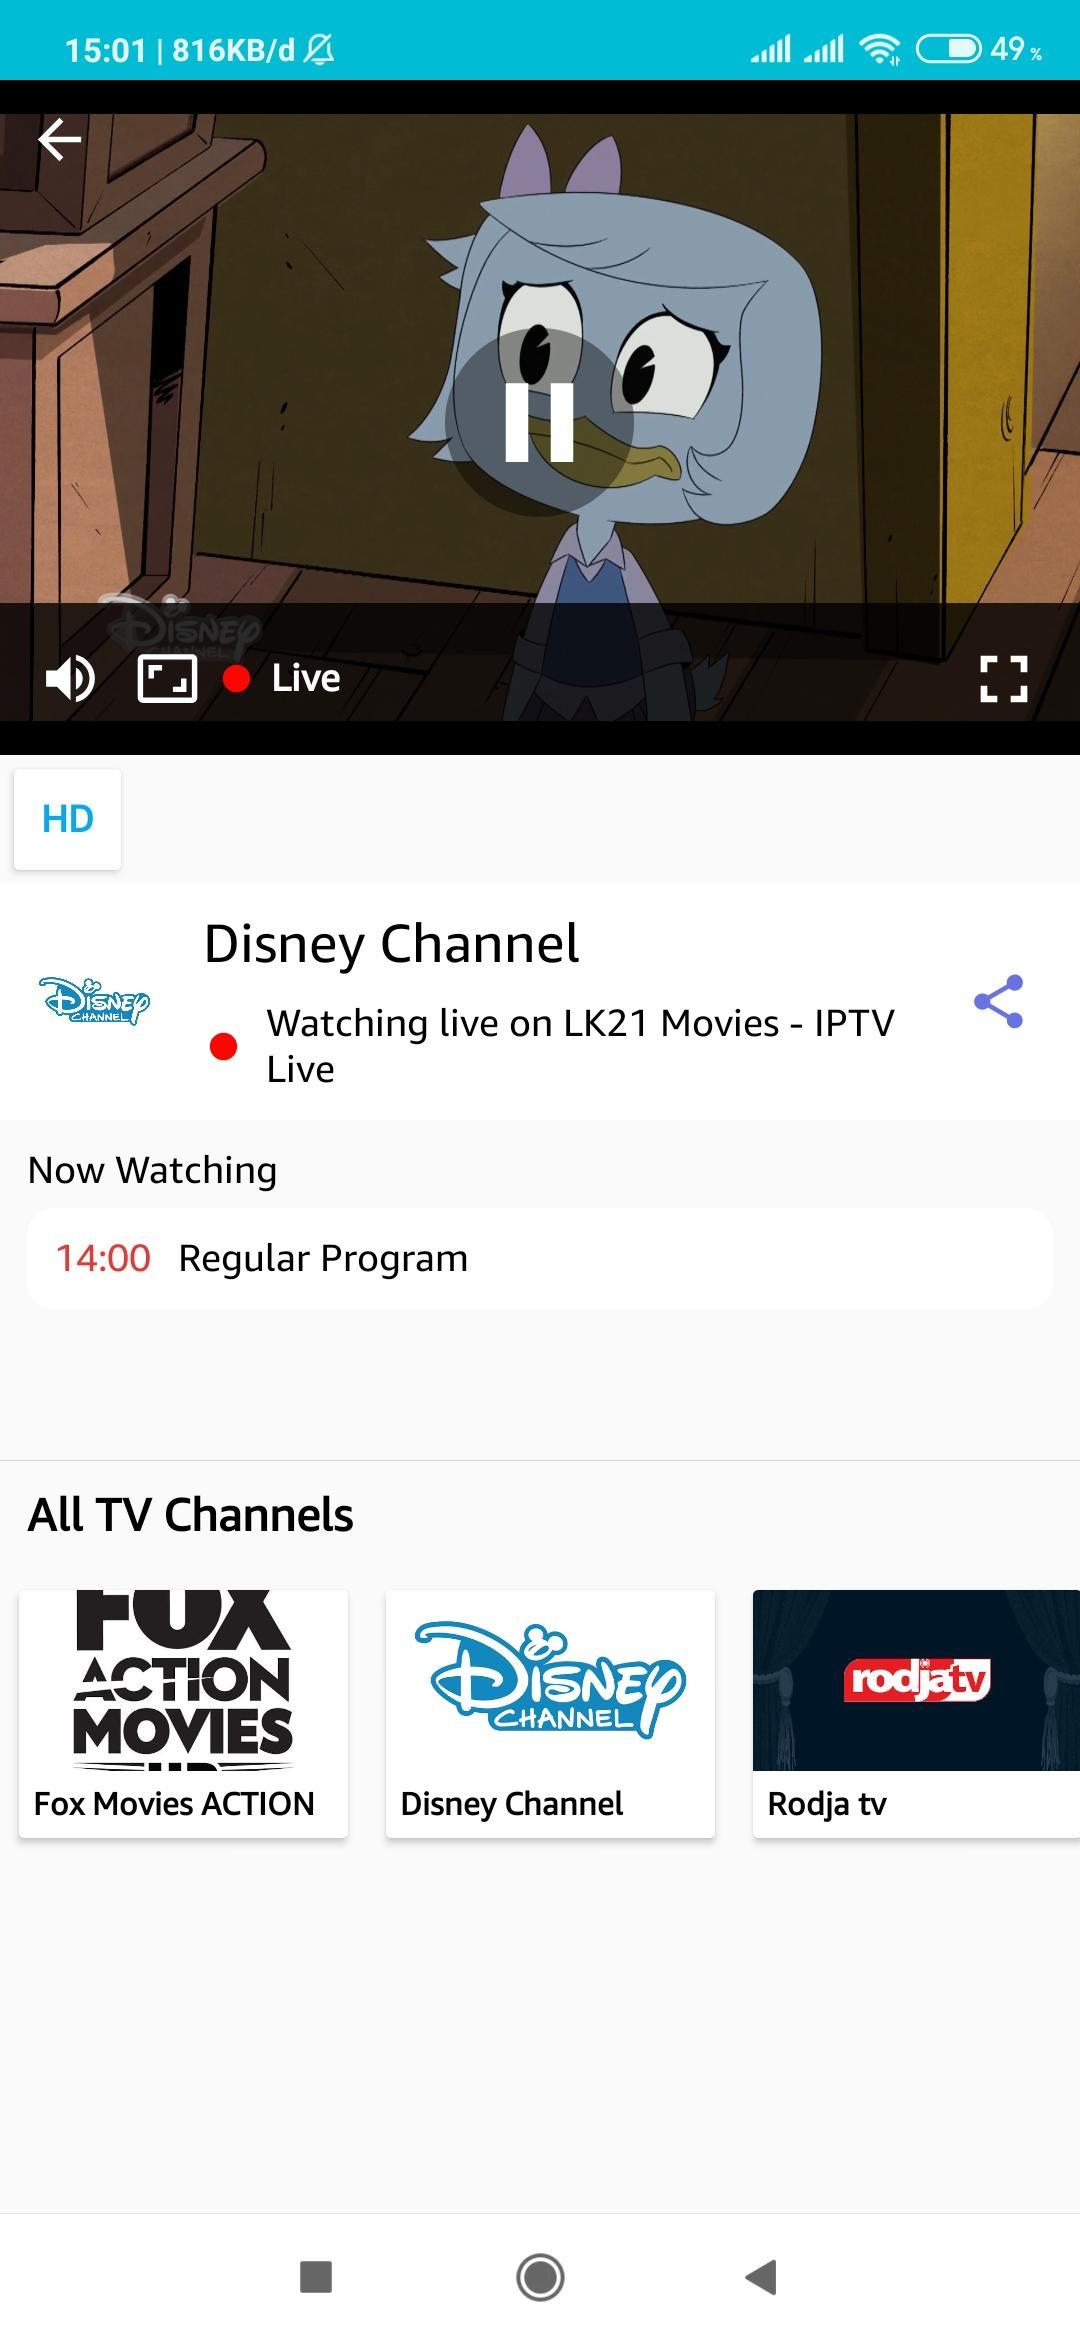 Lk21 Movies Iptv Live World For Android Apk Download